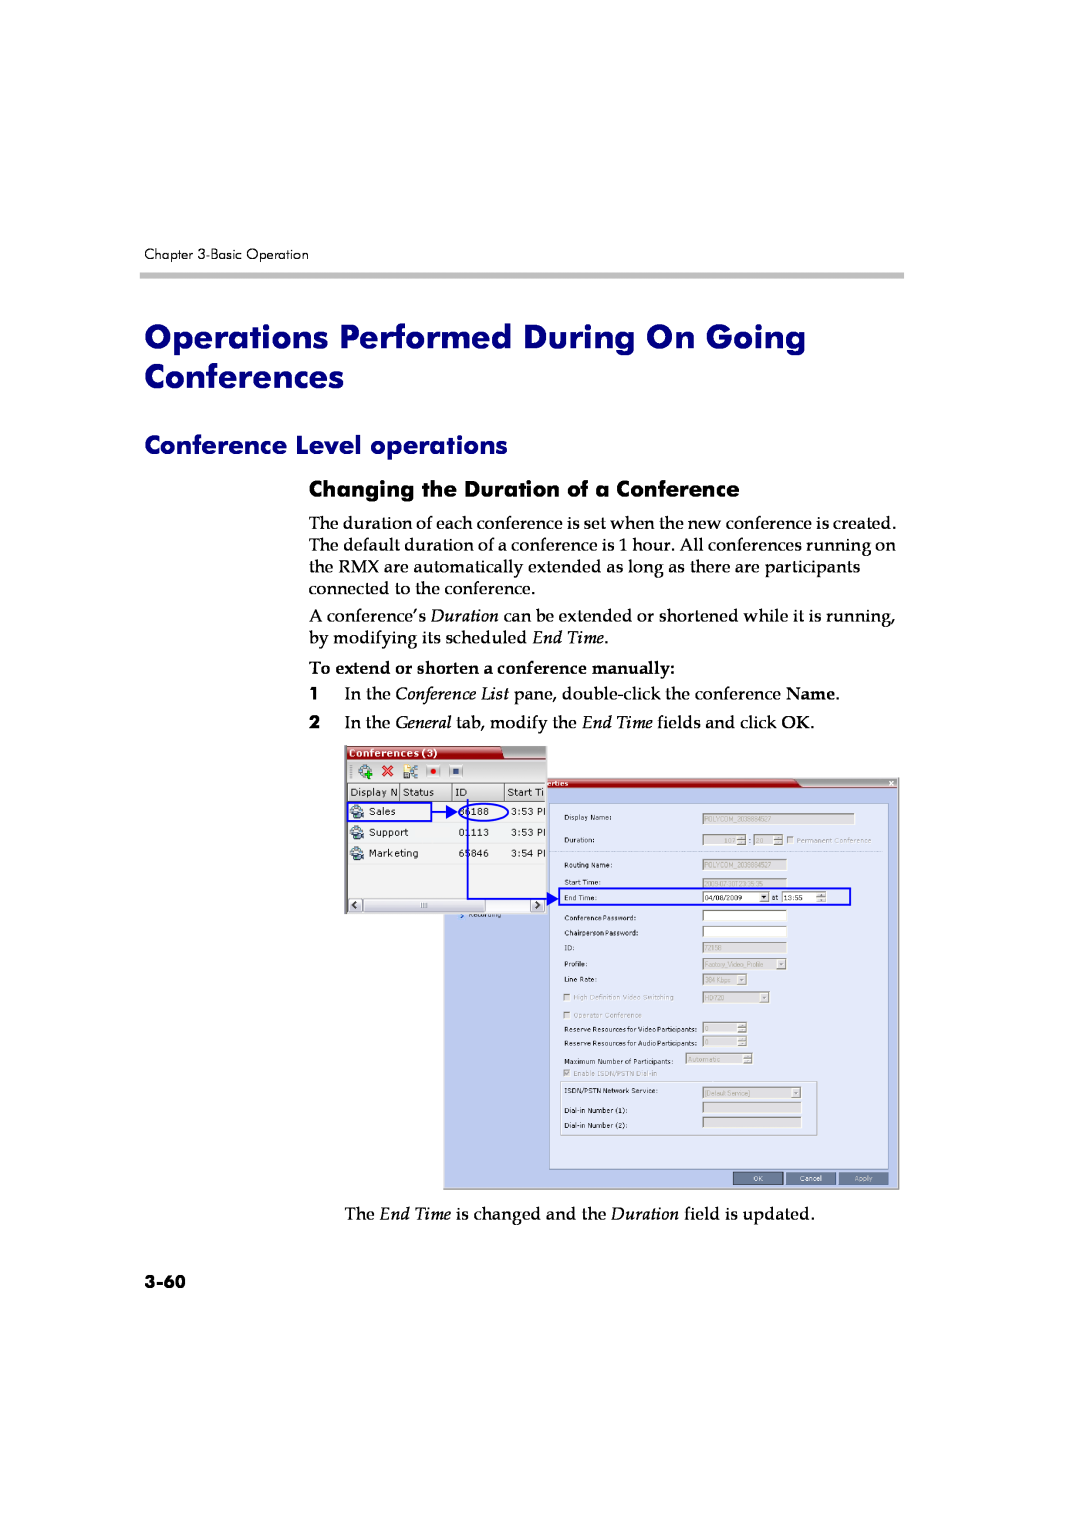 Polycom DOC2560A manual Operations Performed During On Going Conferences, Conference Level operations, 3-60 